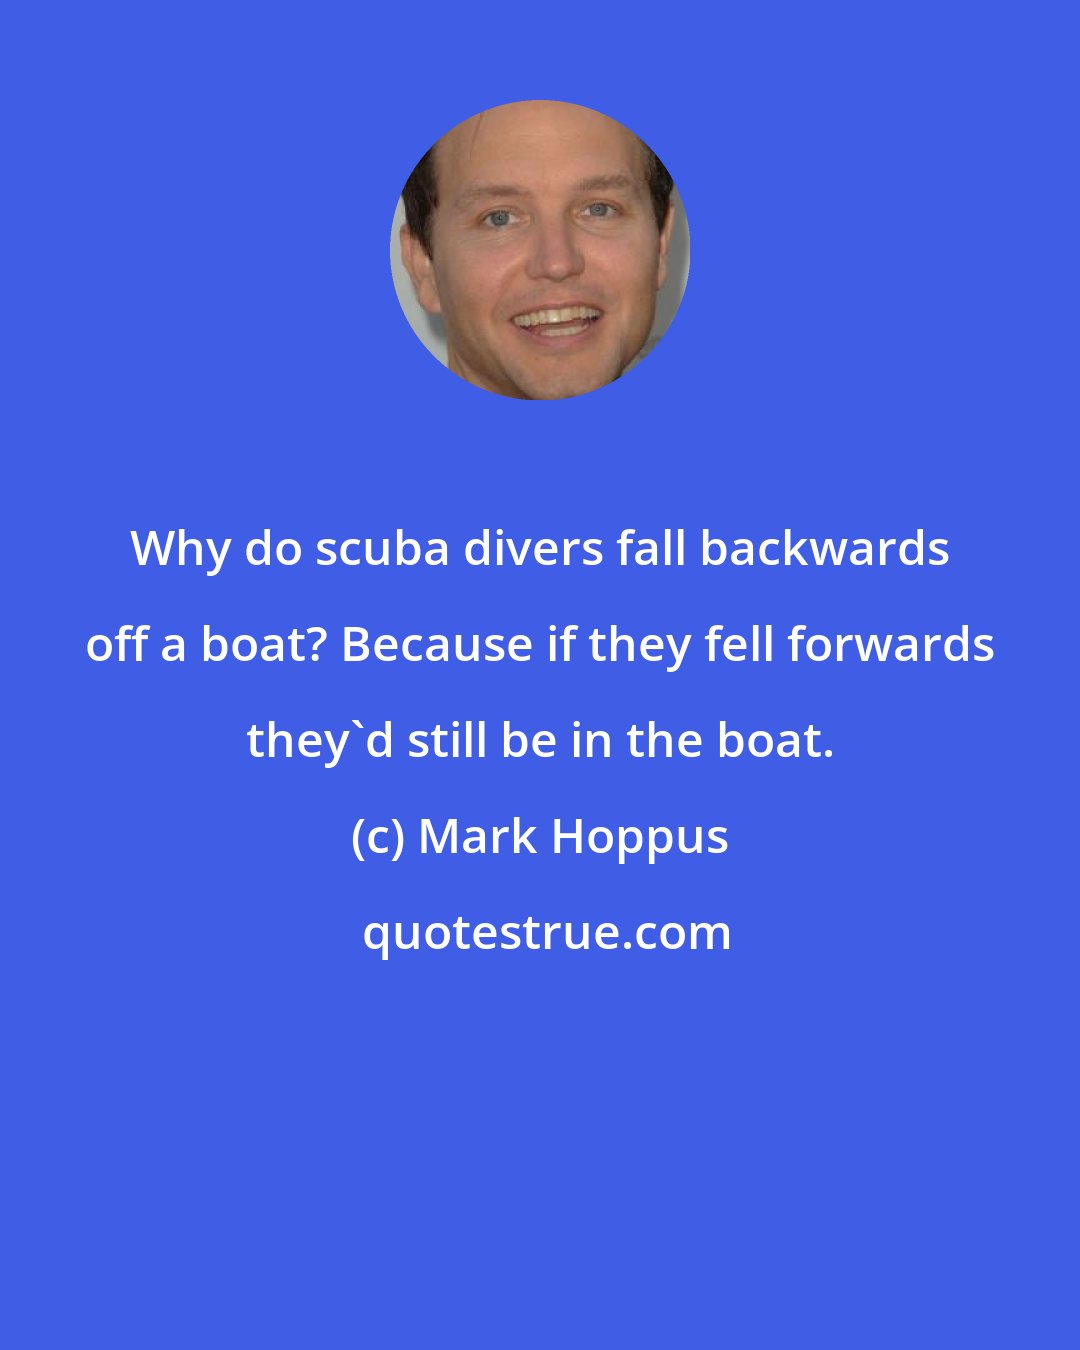 Mark Hoppus: Why do scuba divers fall backwards off a boat? Because if they fell forwards they'd still be in the boat.